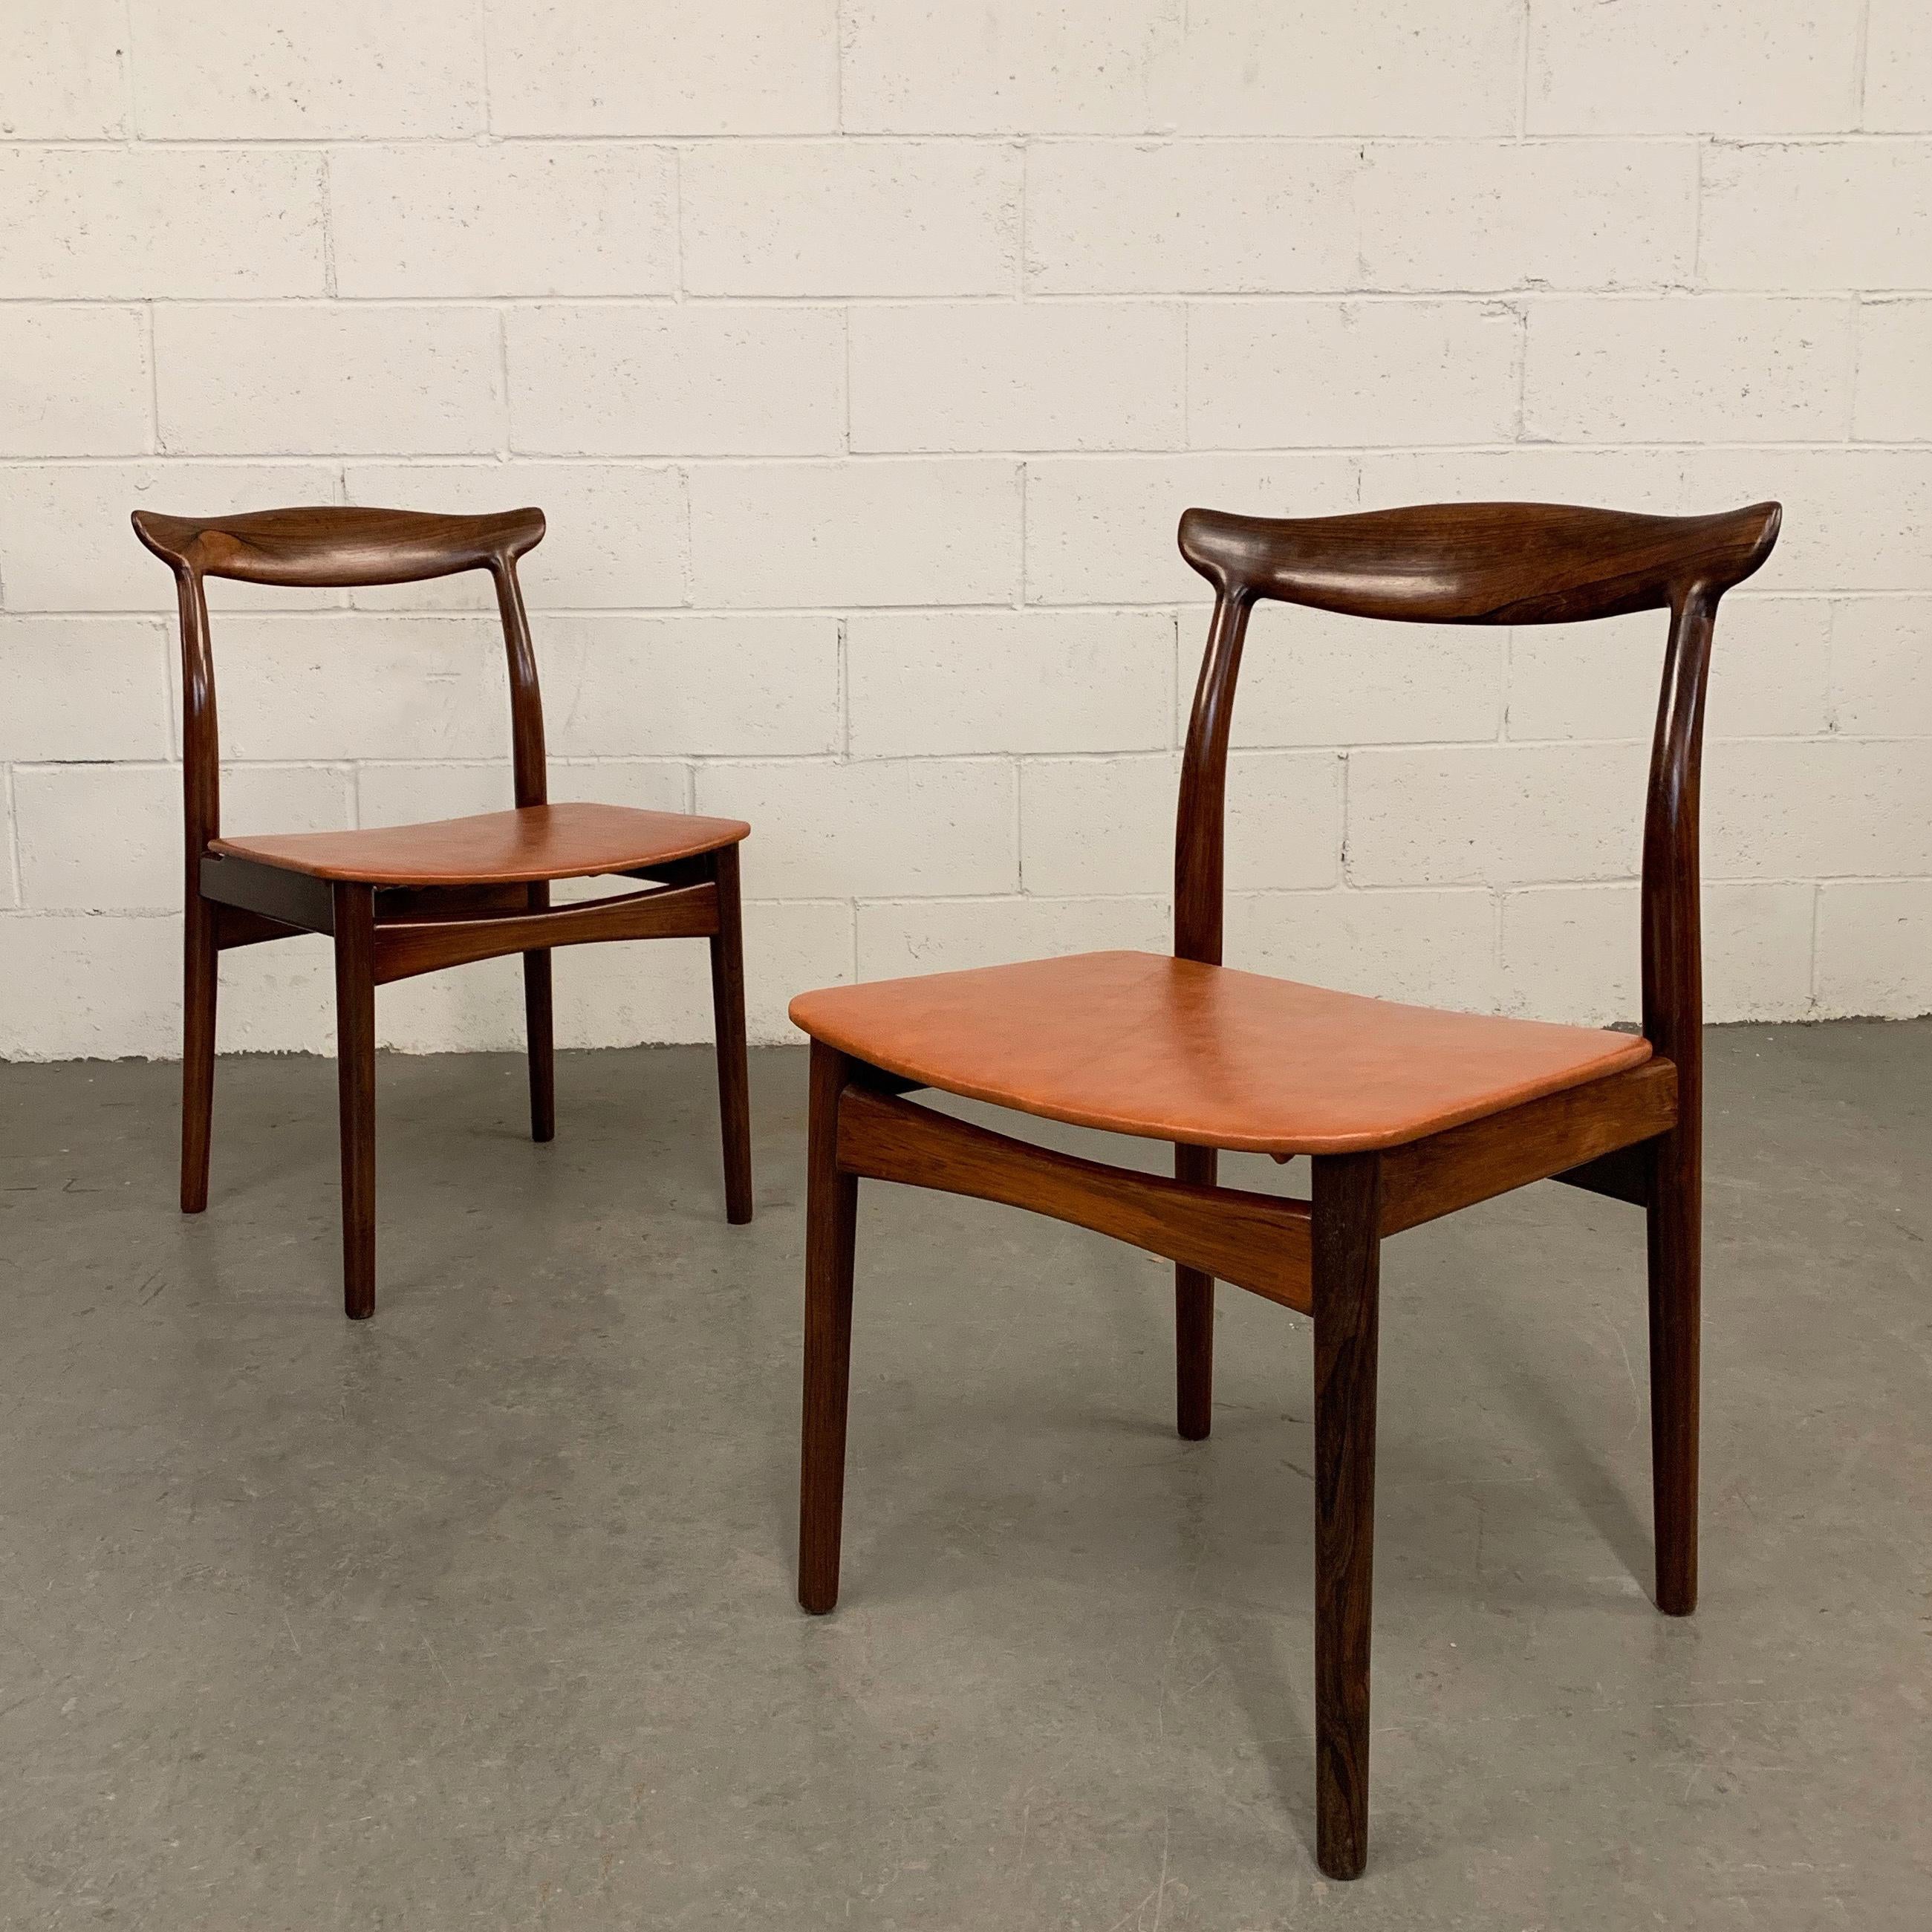 Pair of elegant, Danish modern, model 112 chairs by Erik Wørts for Vamo Møbelfabrik feature rosewood frames with cow Horn backs and floating leather seats.